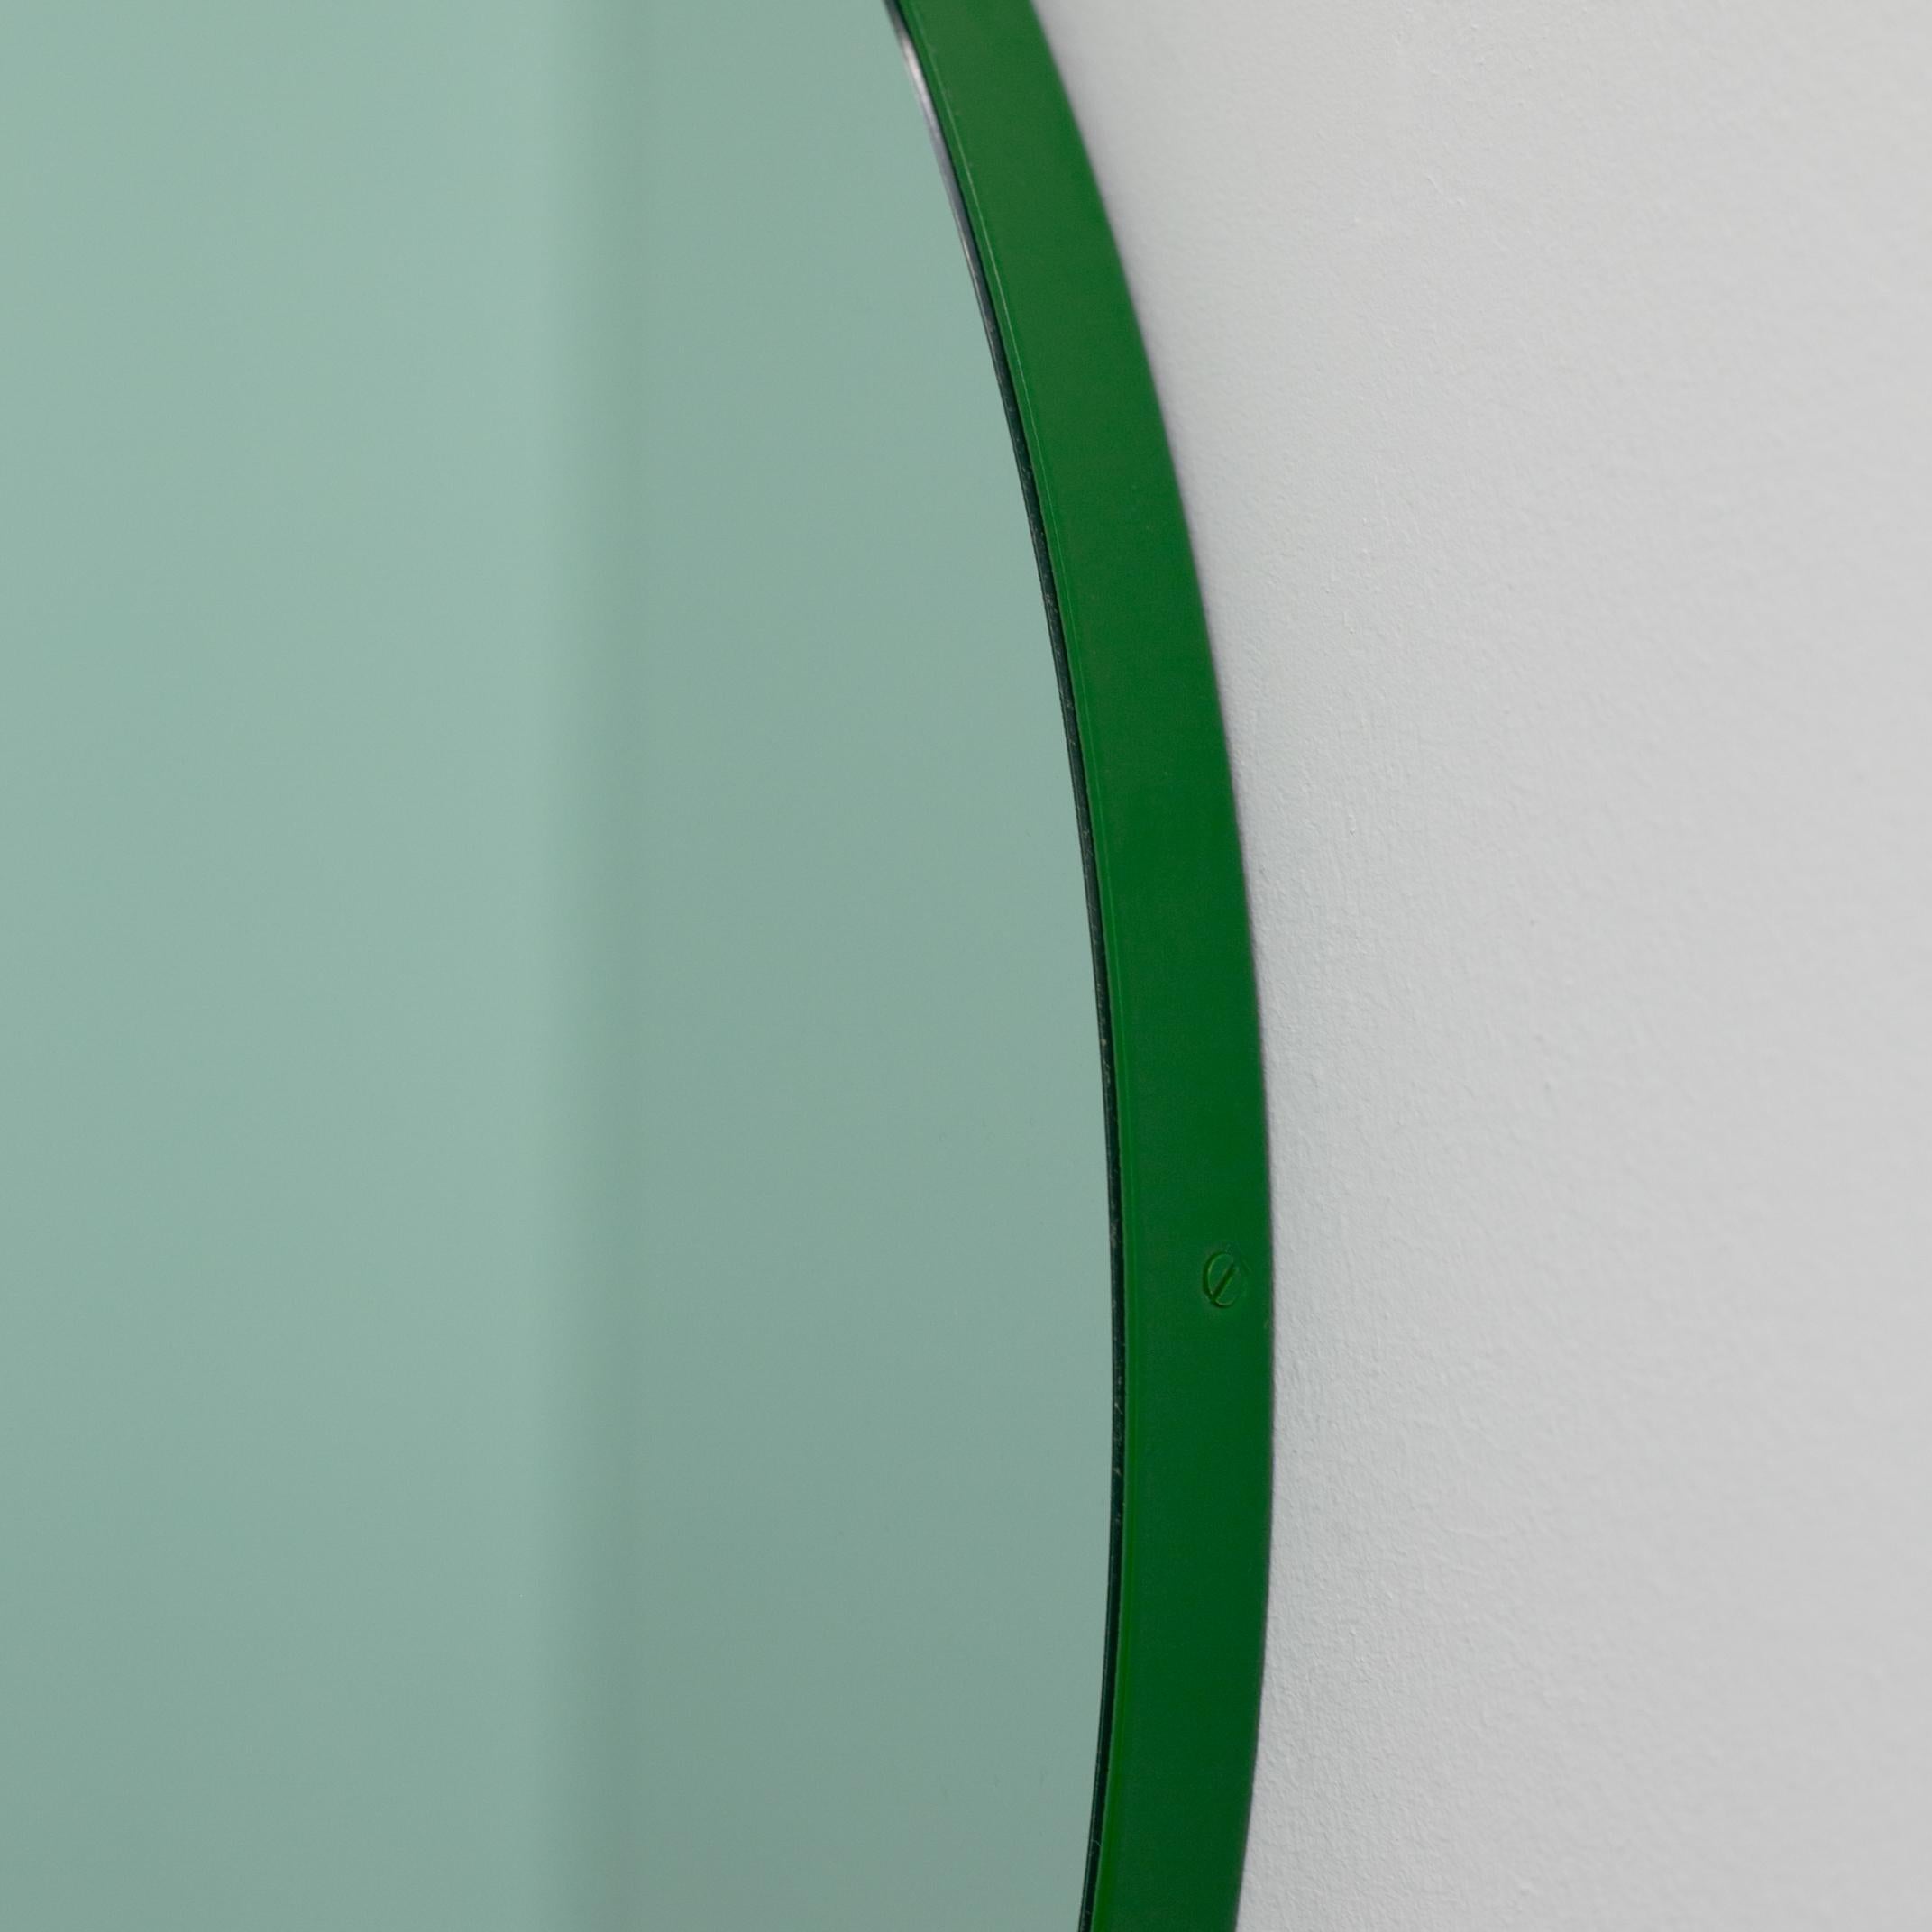 Orbis™ Green Tinted Modern Round Mirror with Green Frame - Oversized 1